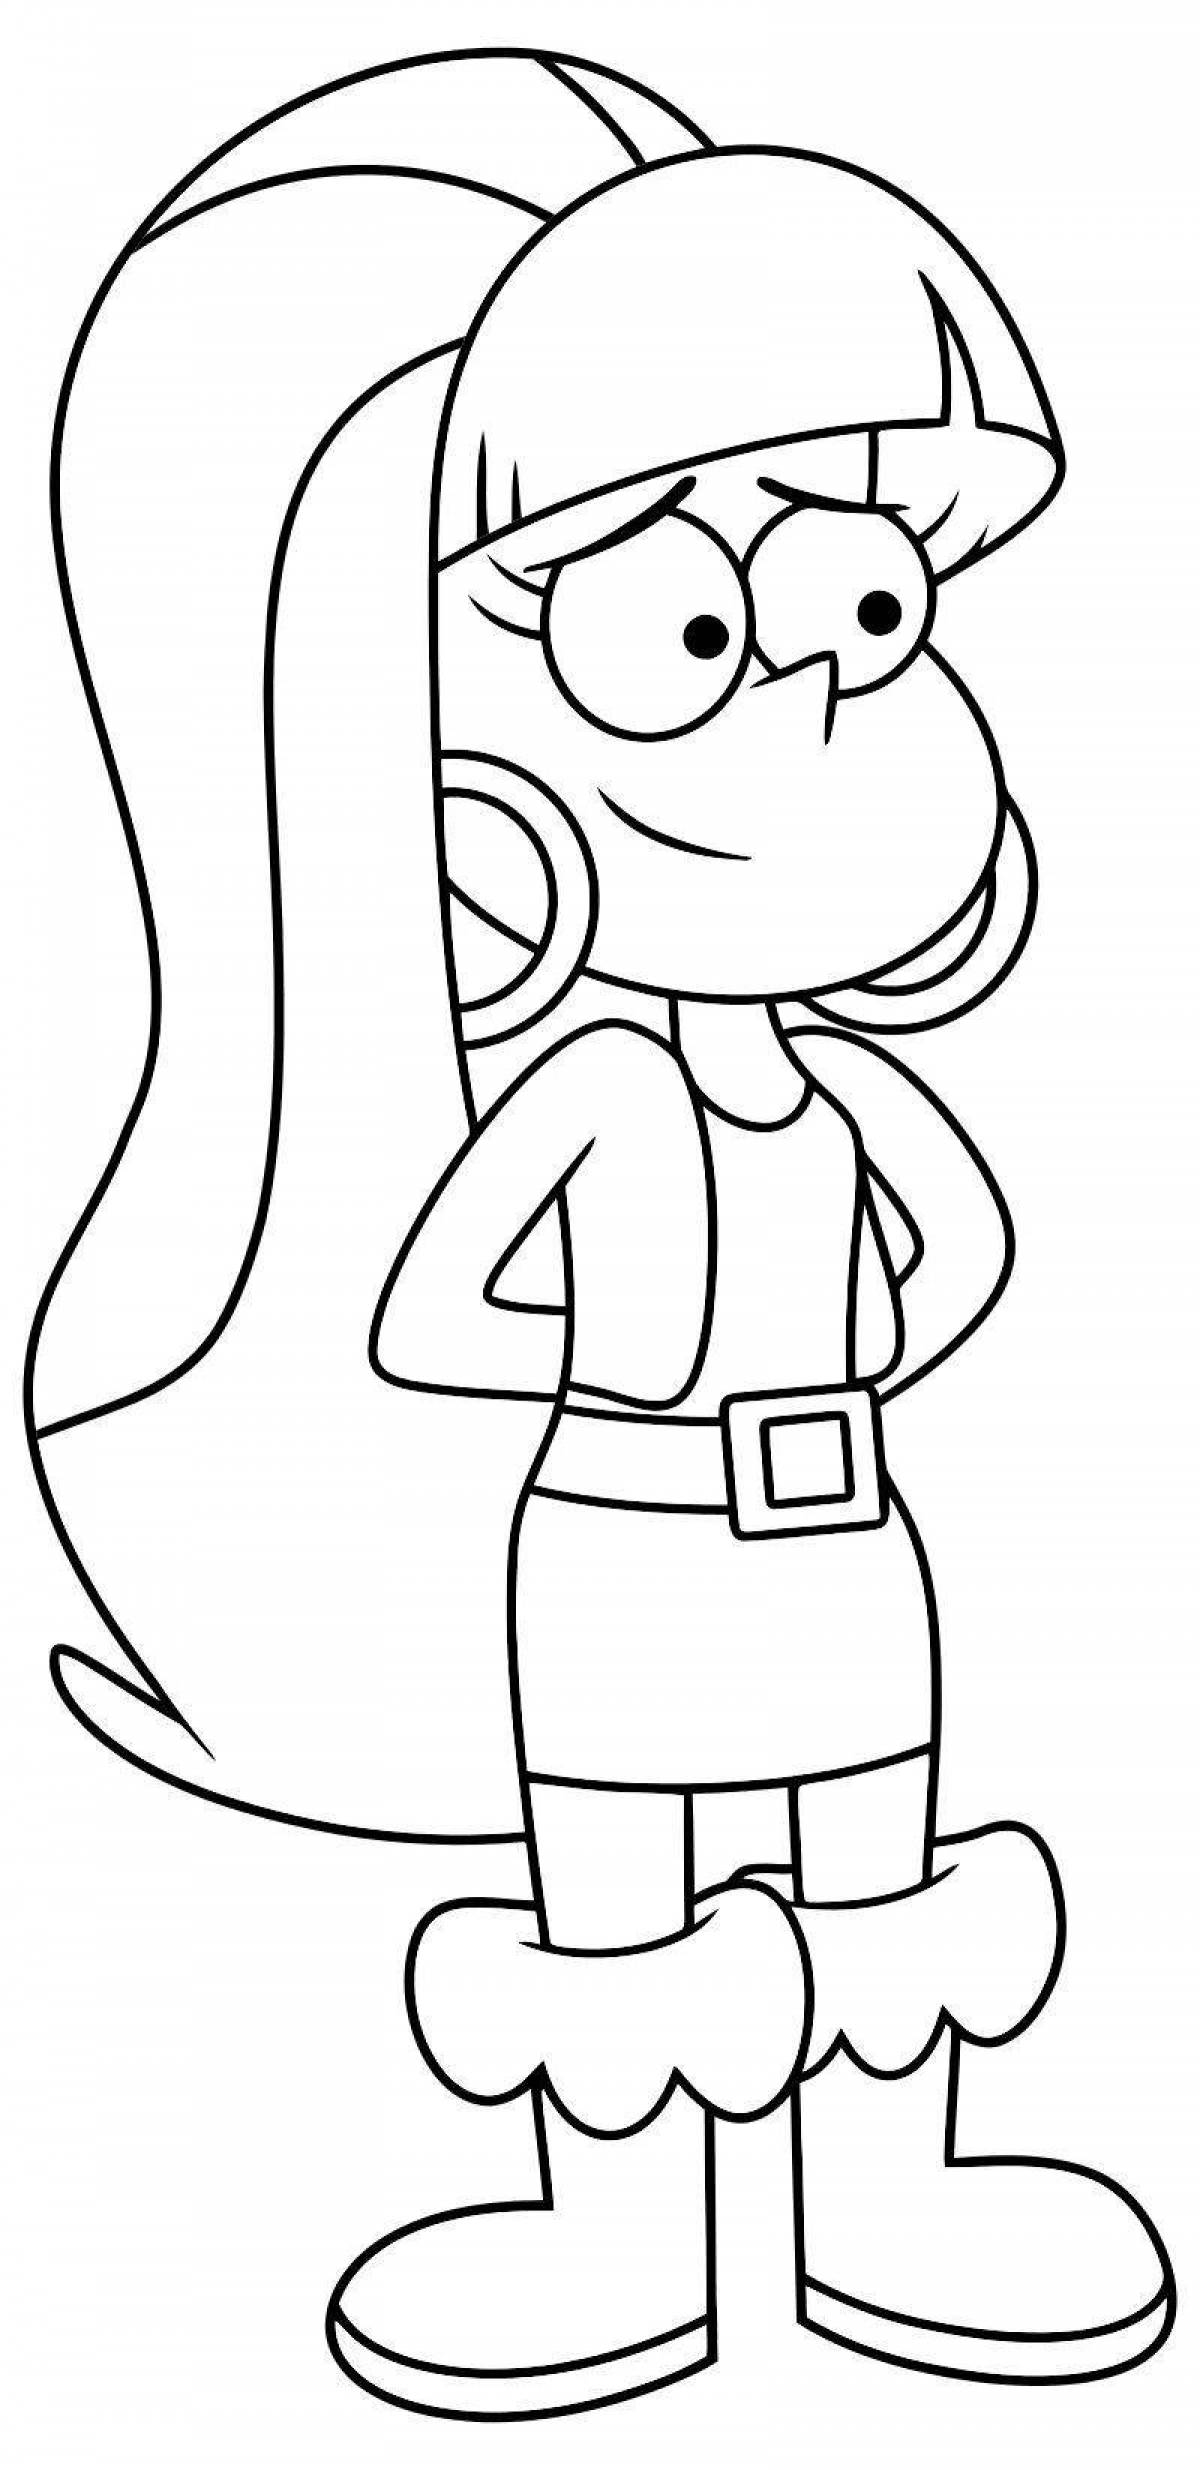 Amazing pacifica coloring page